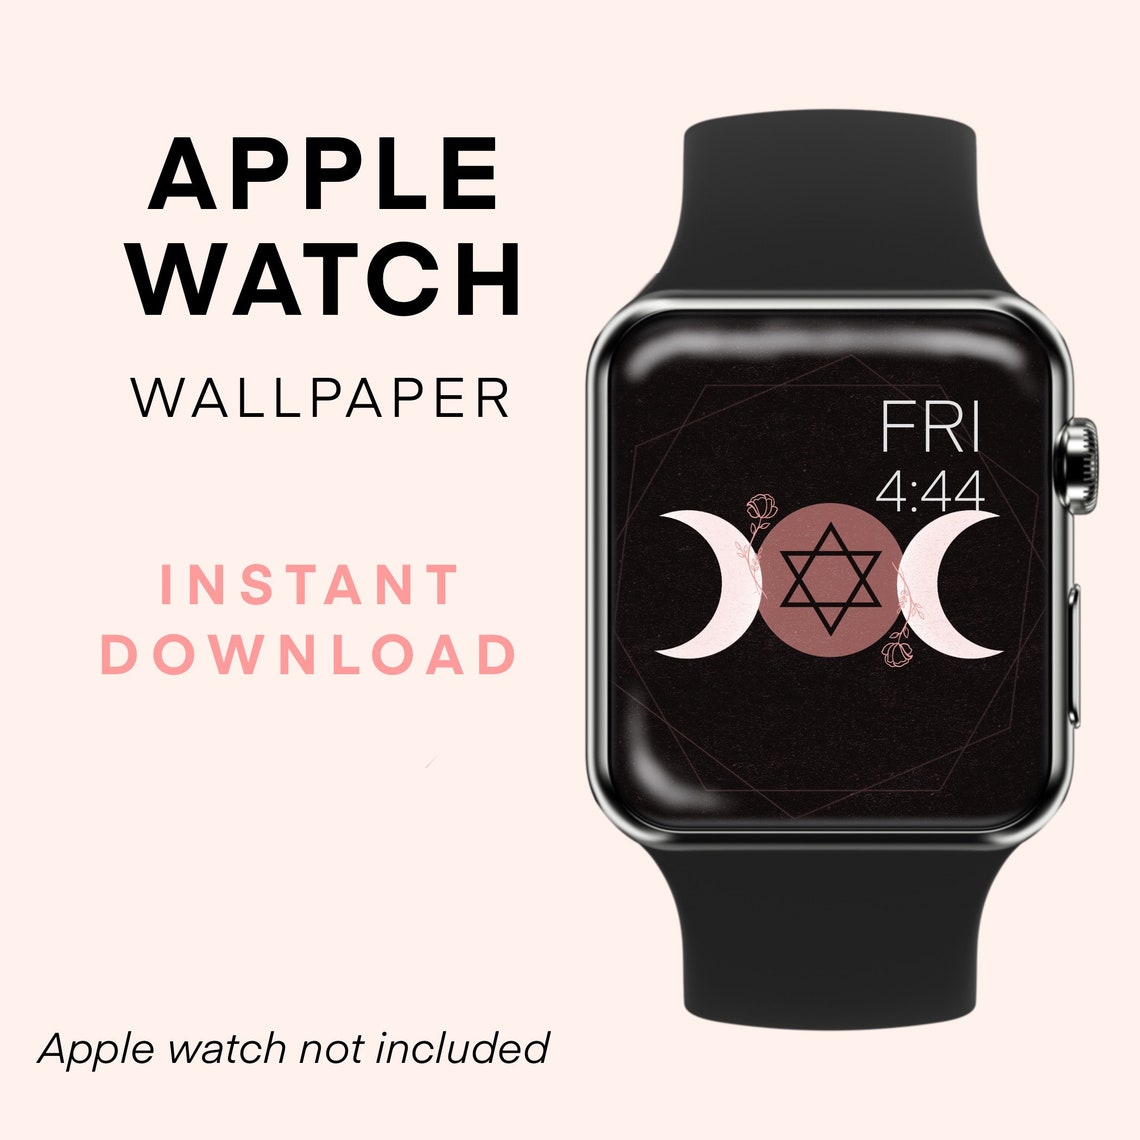 Apple Watch Wallpaper moon phase Print for Your Apple Watch | Etsy